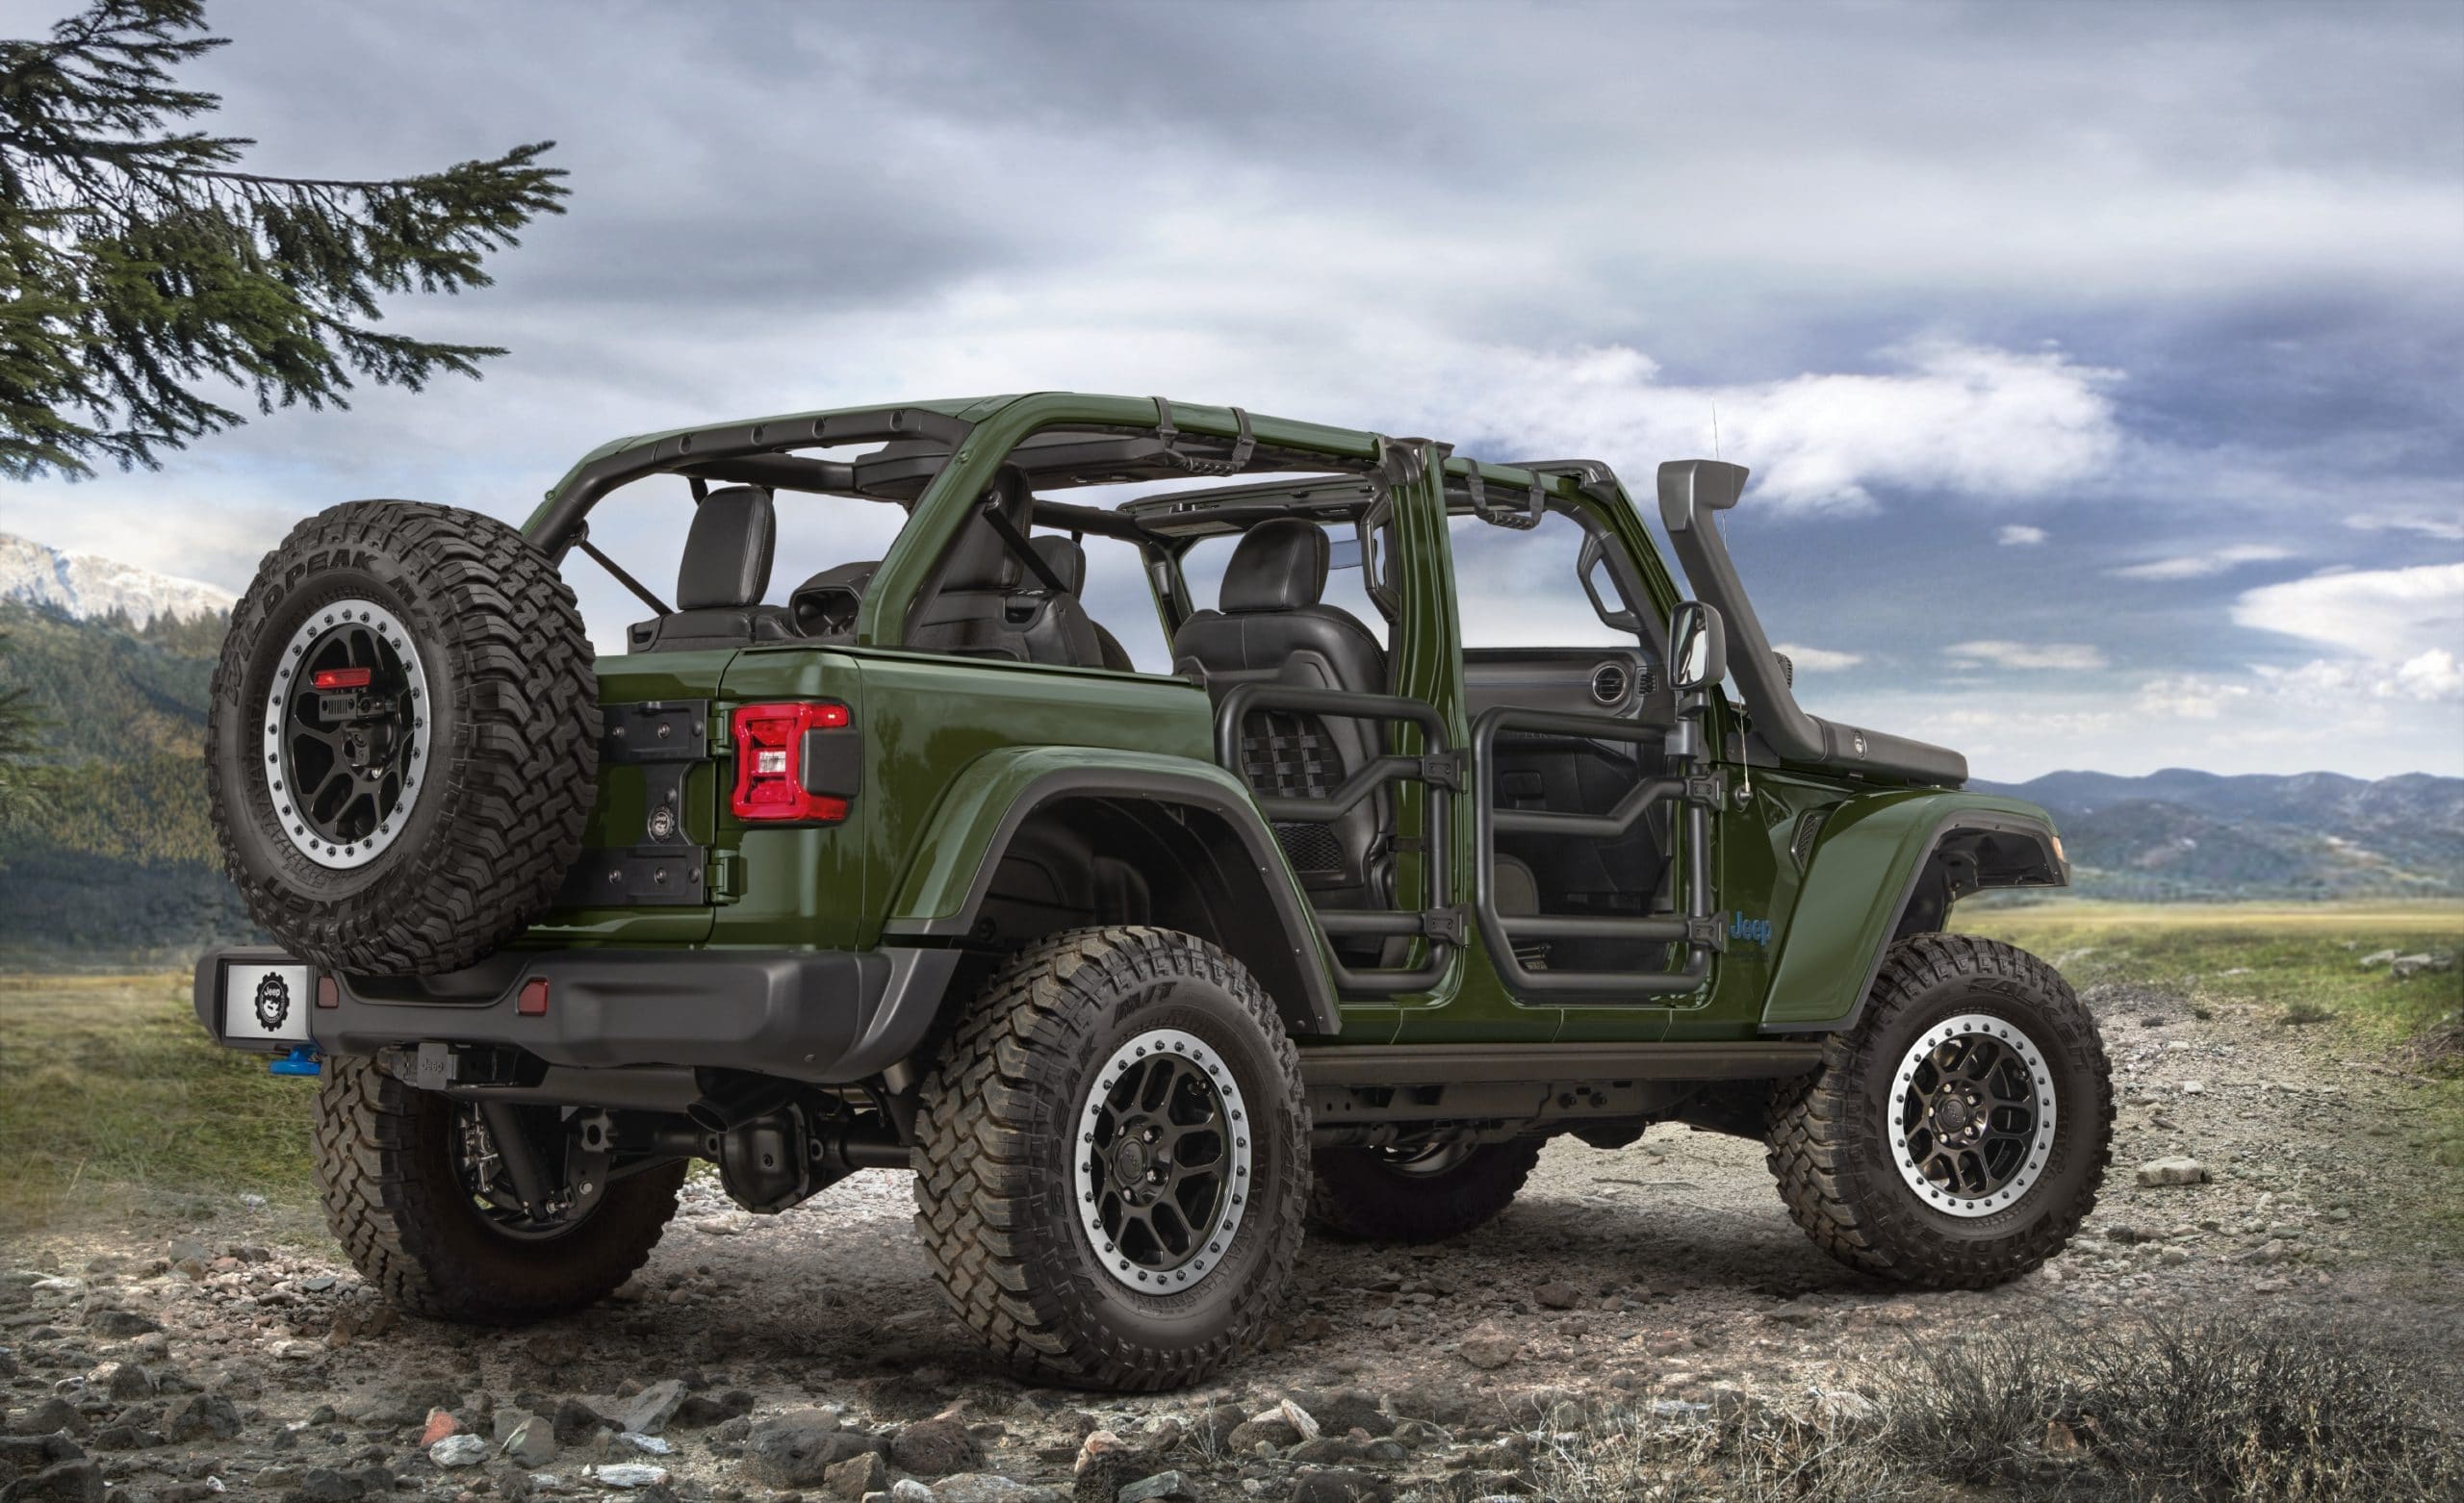 Jeep Performance Parts Introduces Industry-first 2-inch Lift Kit for a Plug-in Hybrid Electric Vehicle